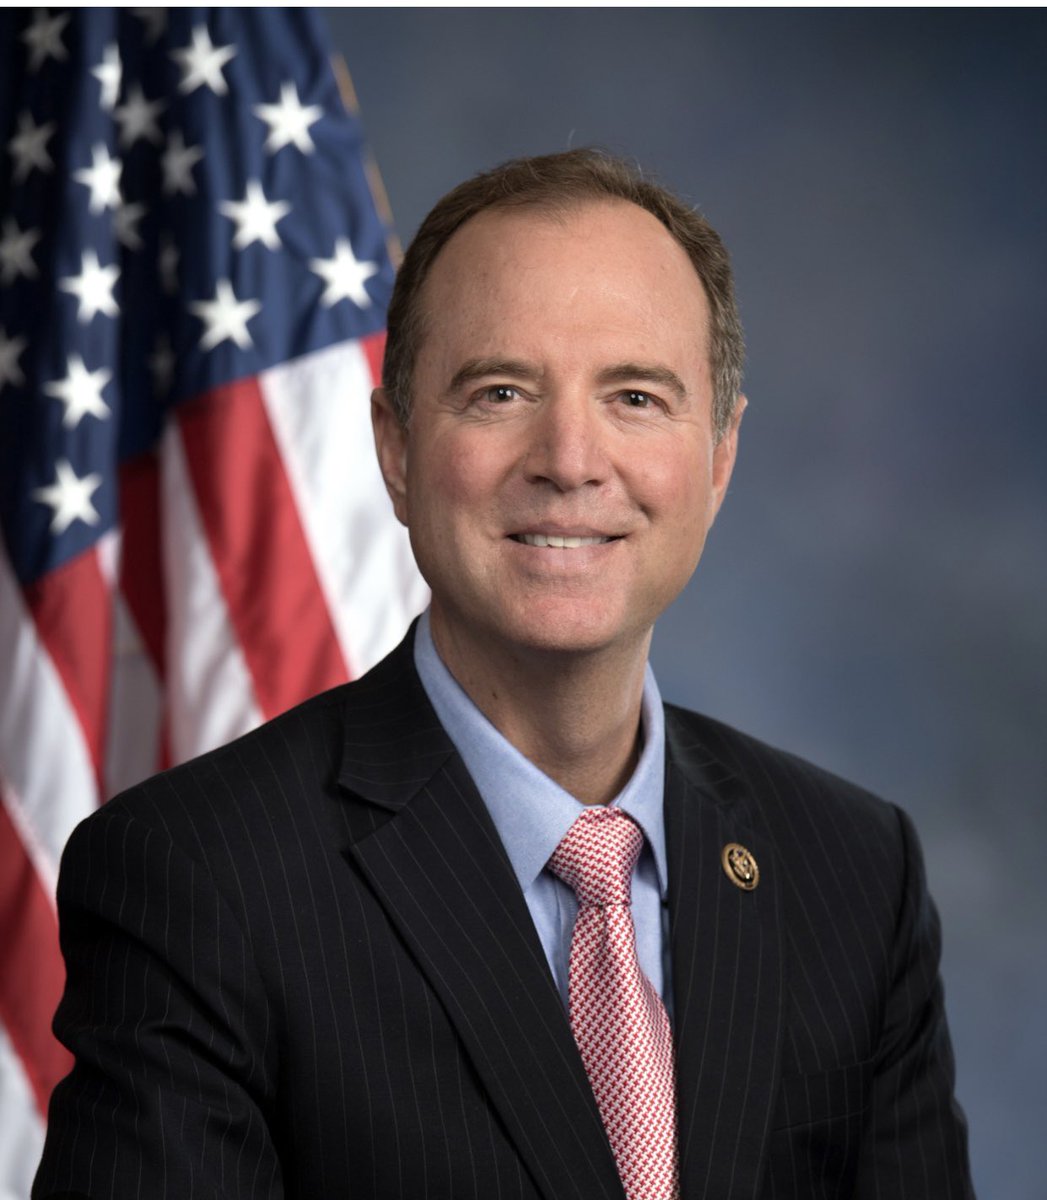 RT @AnthonyResists: I stand with Adam Schiff !  
RT if you do too ! https://t.co/hzRfjxbknE